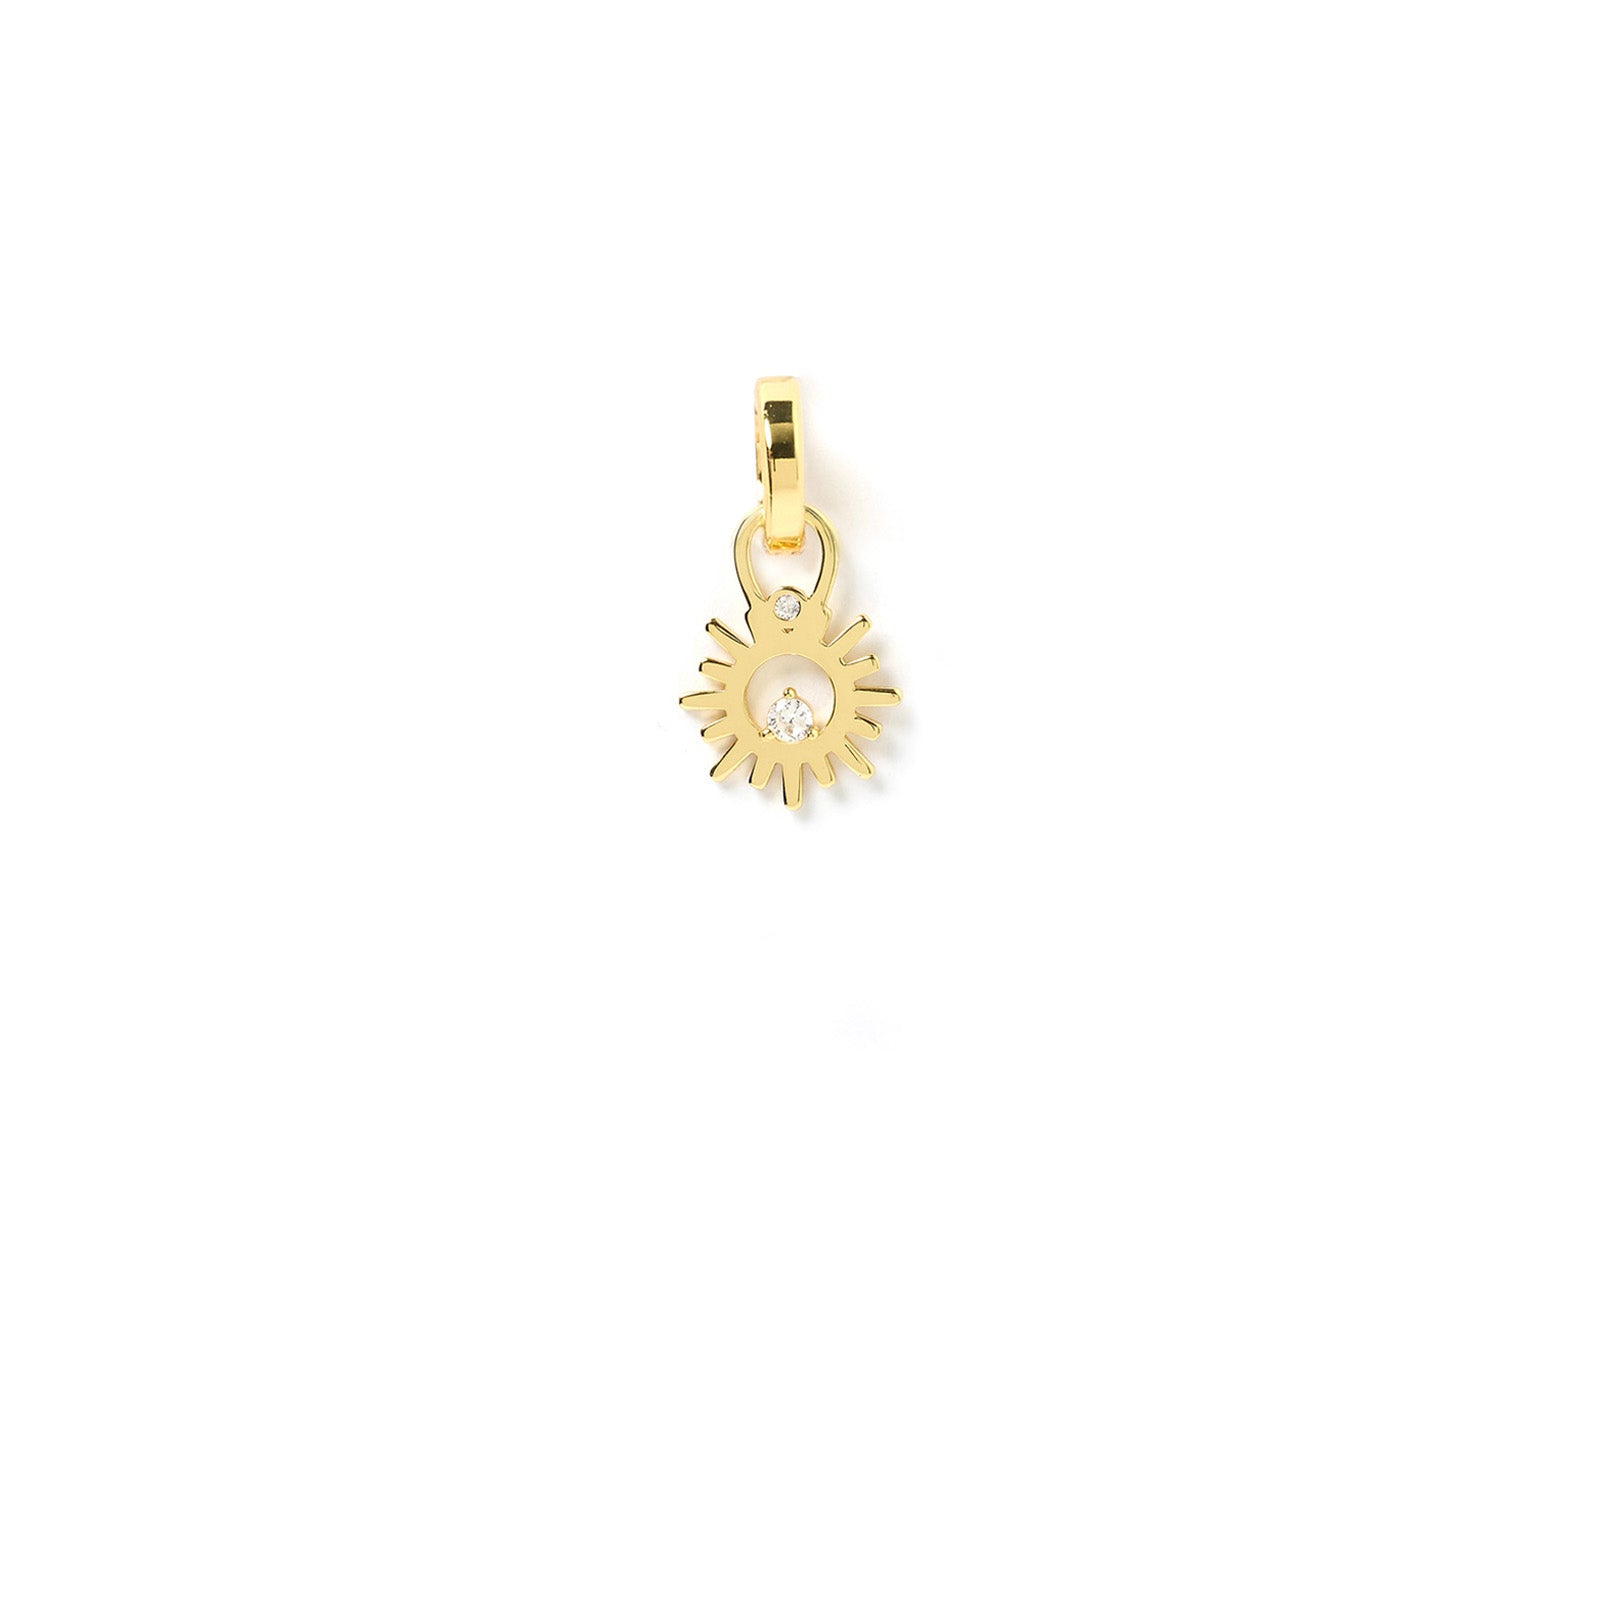 Arms Of Eve Aphrodite gold sun-shaped charm featuring a dazzling diamond at its center